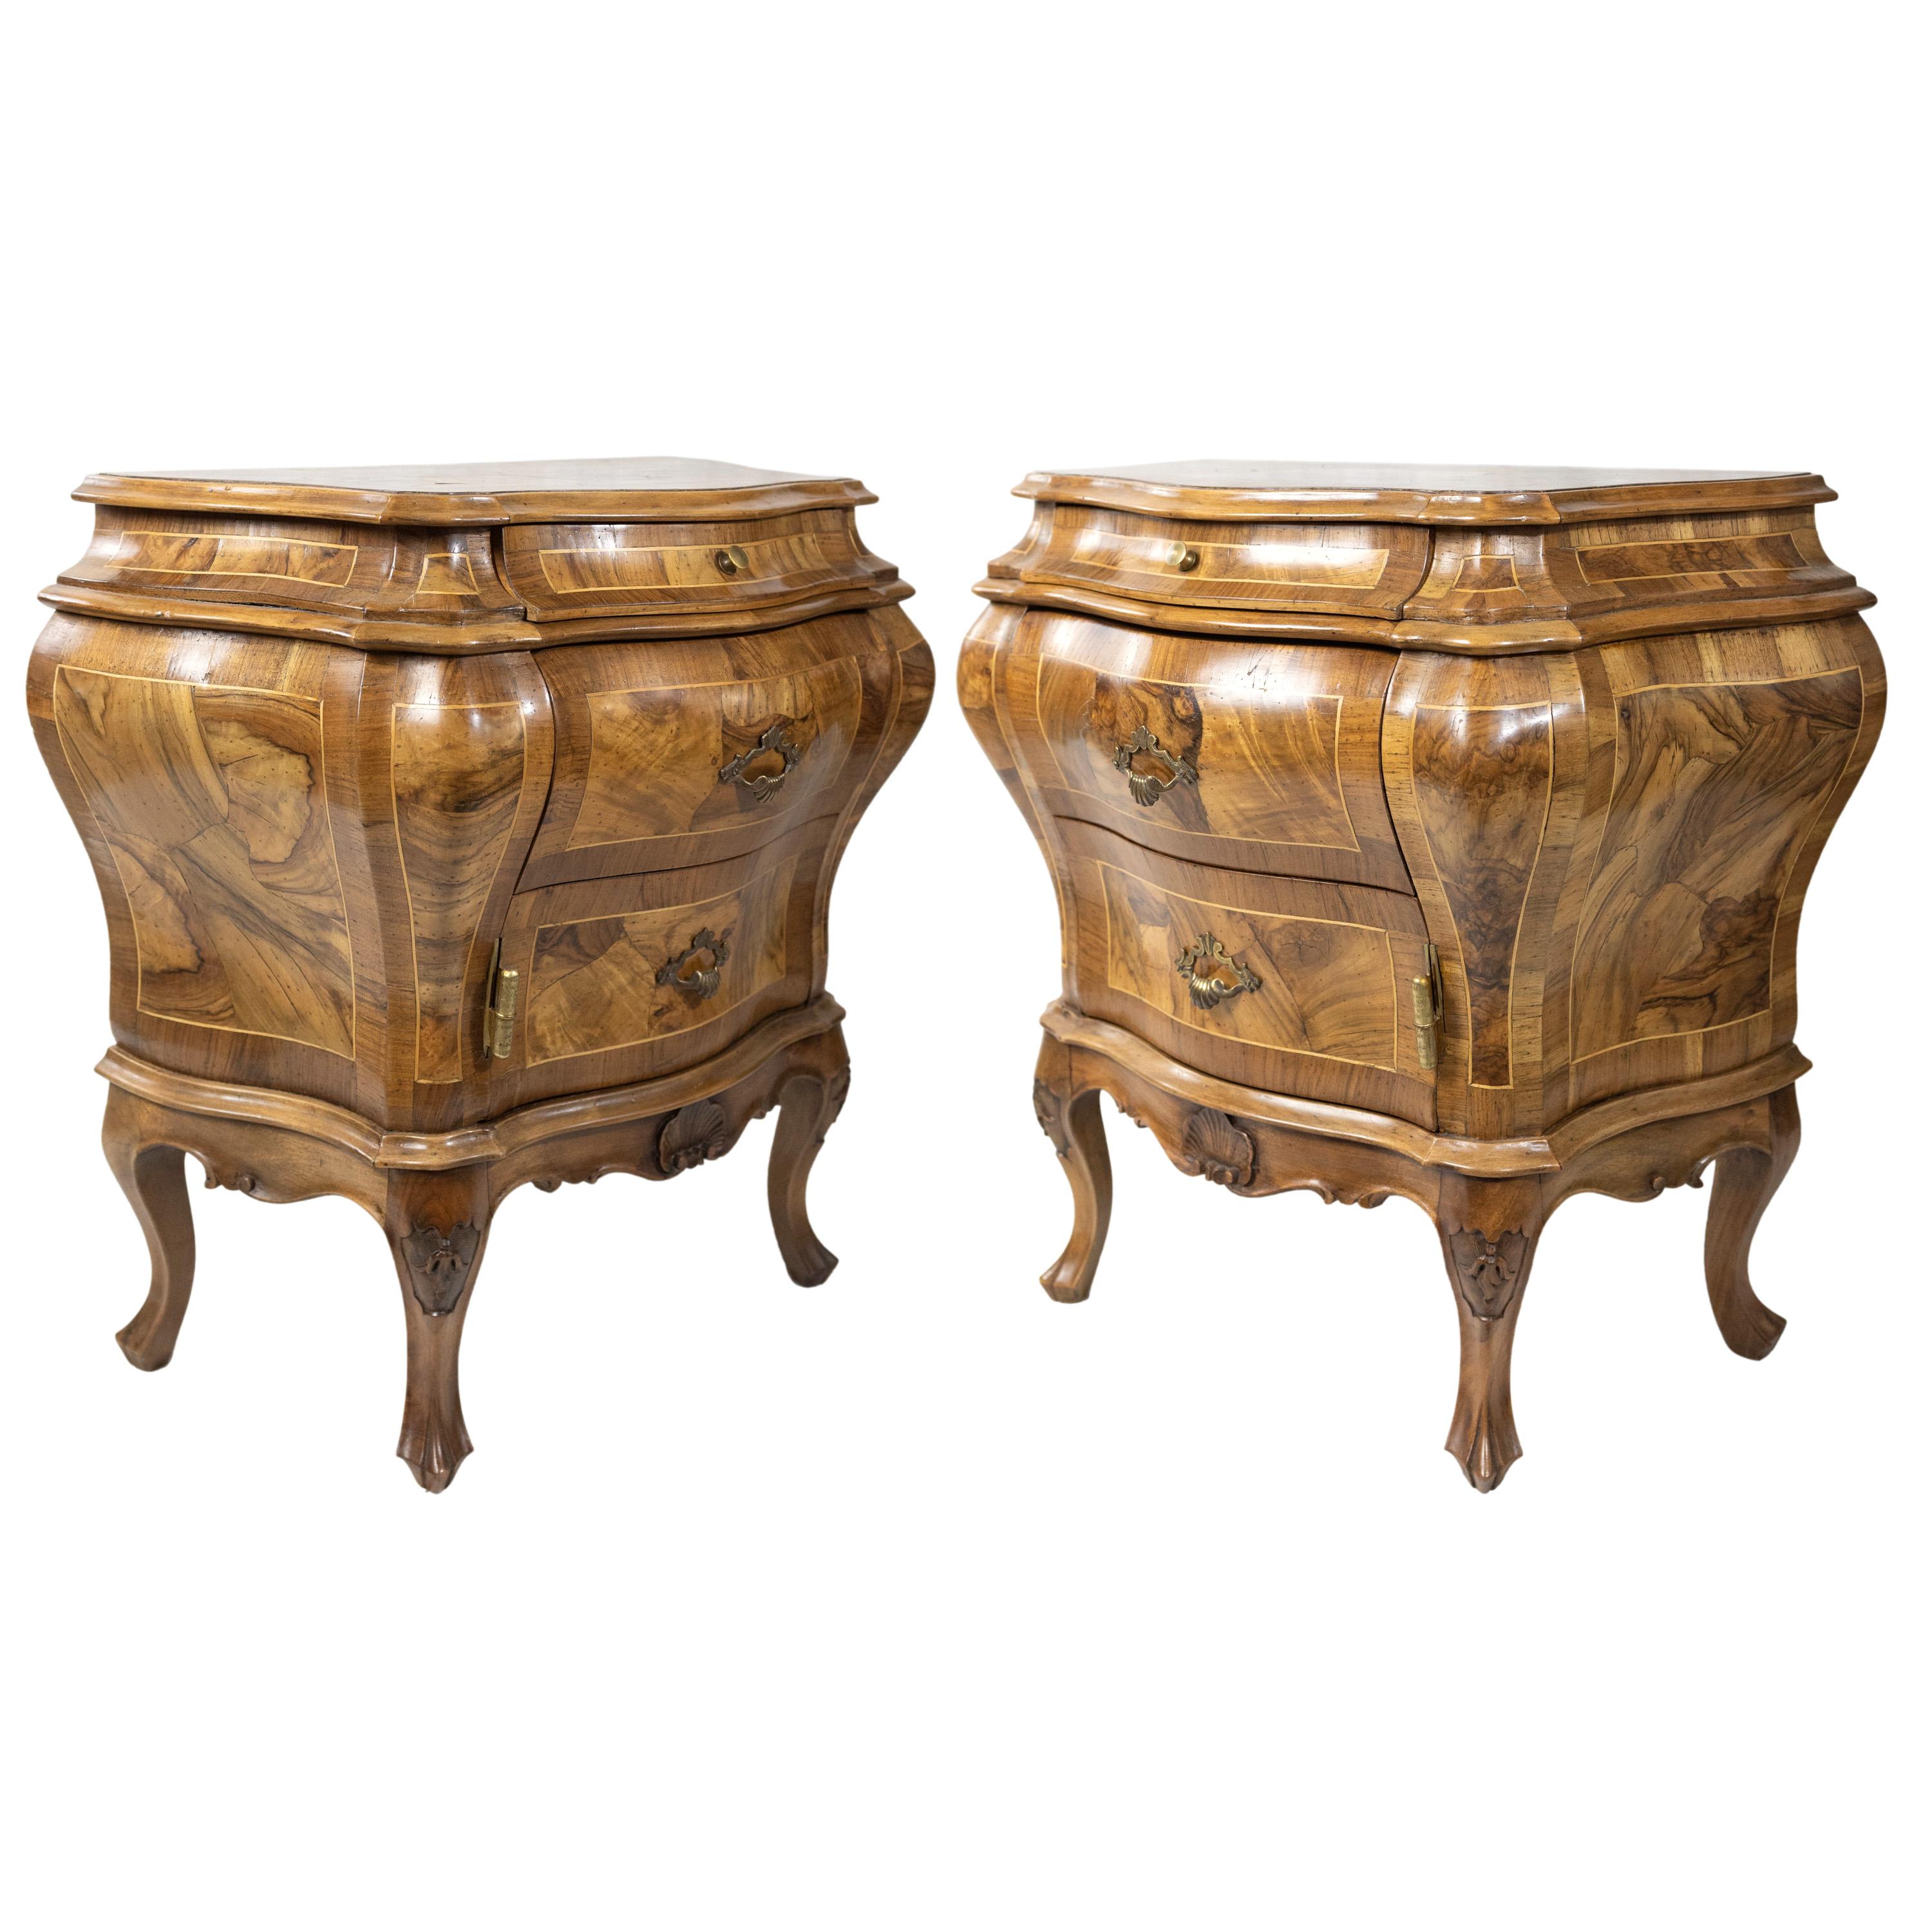 An Exceptional Pair of Olive Wood Bombé Commodes/Side Cabinets, each with a frieze drawer over a single drawer and cabinet, the shaped apron with a carved fan, with further carving to the knees, on stylized cabriole legs. 
Lovely aged patina to the